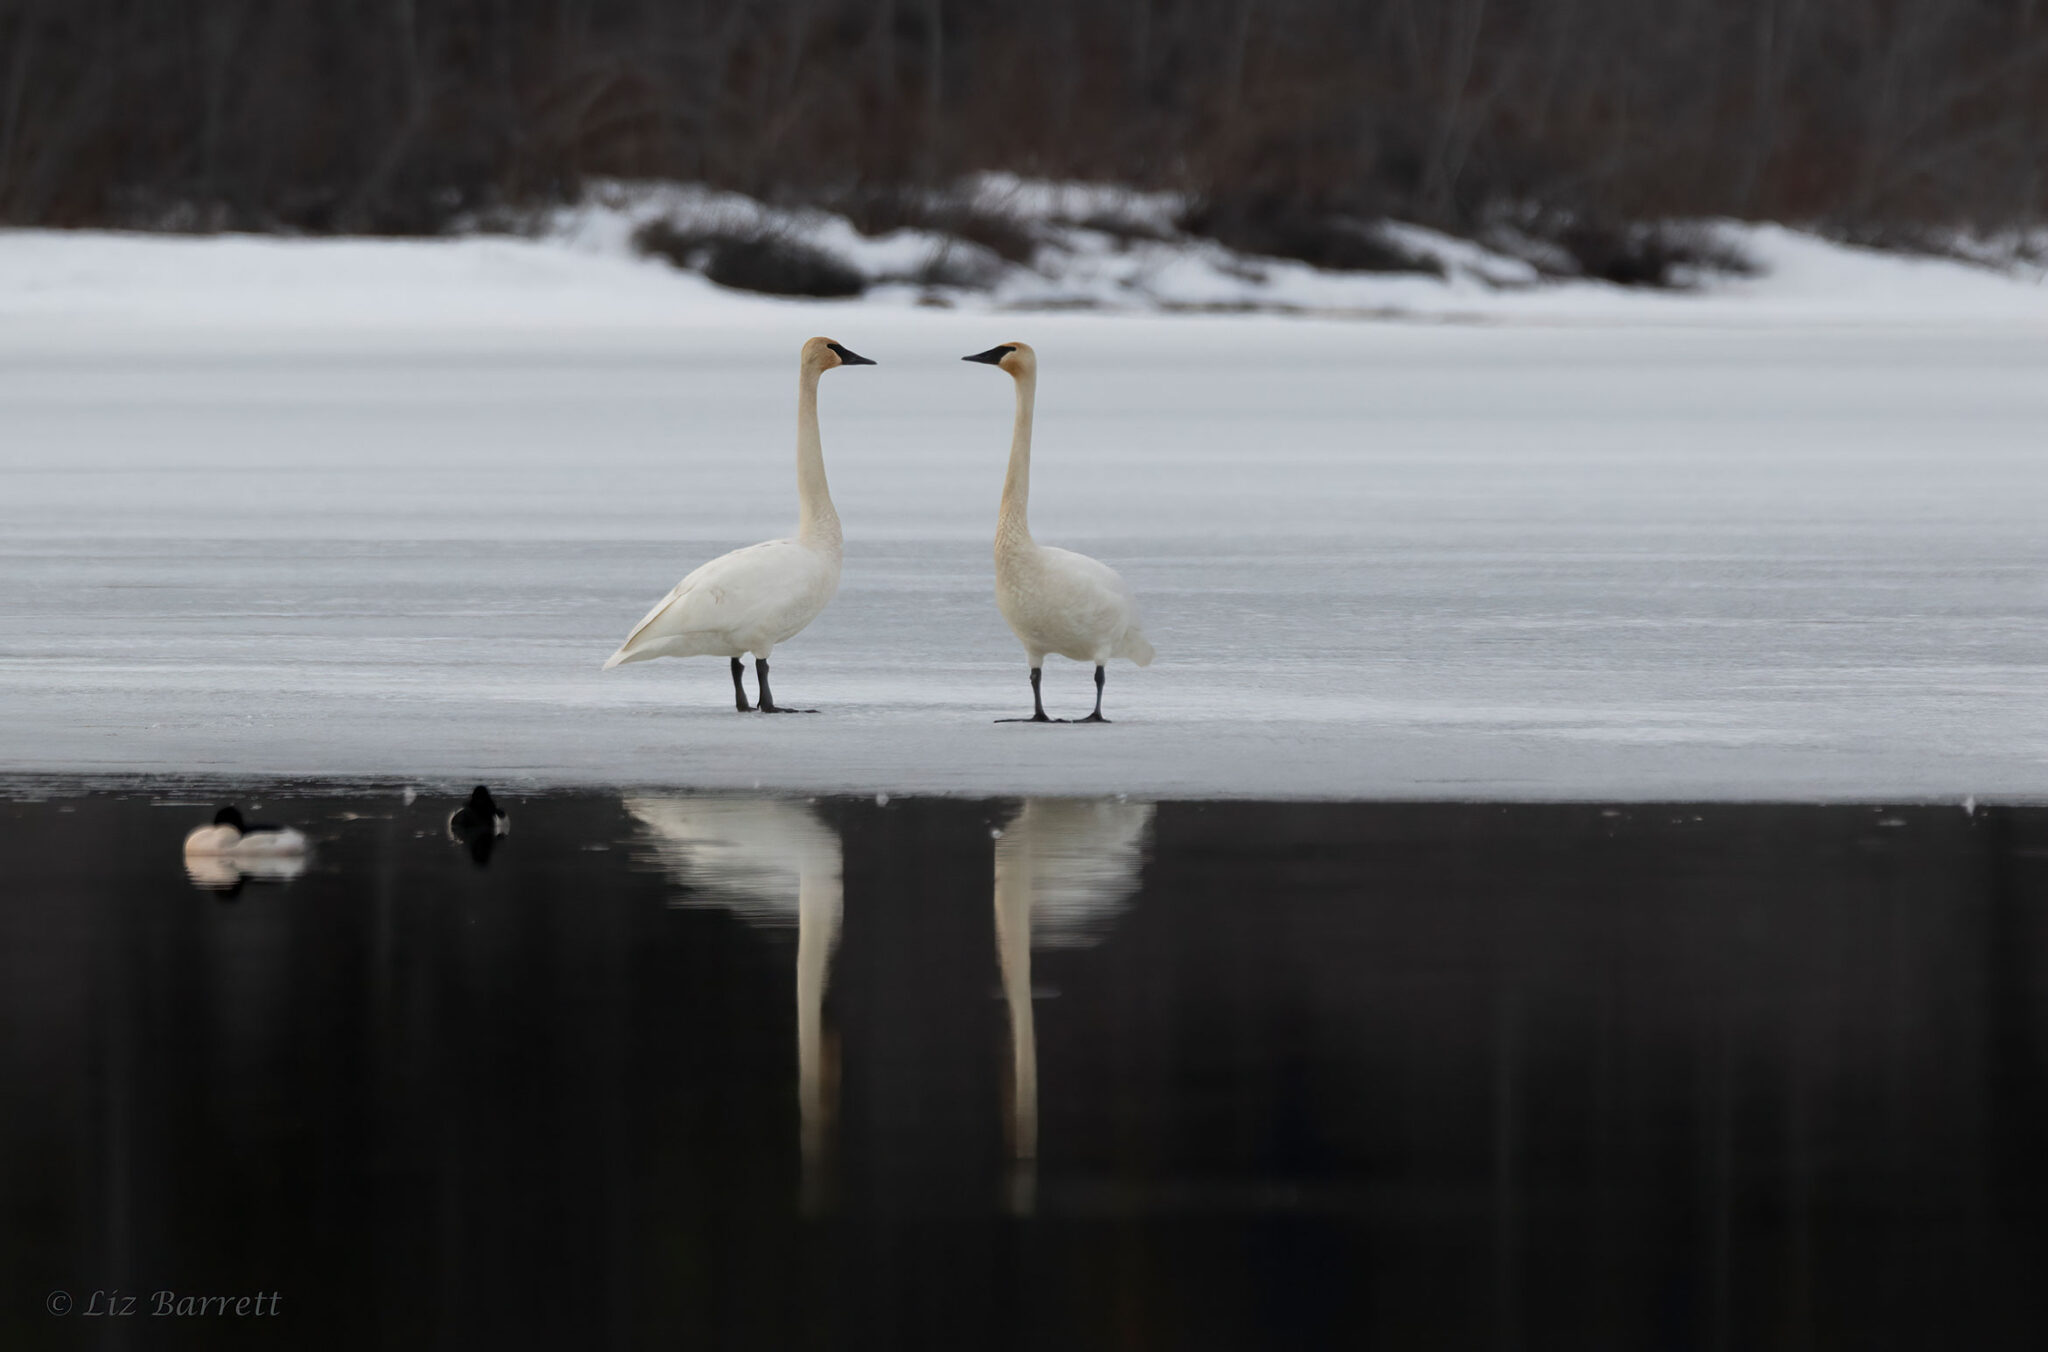 Two trumpeter swans on the lake in Whistler.